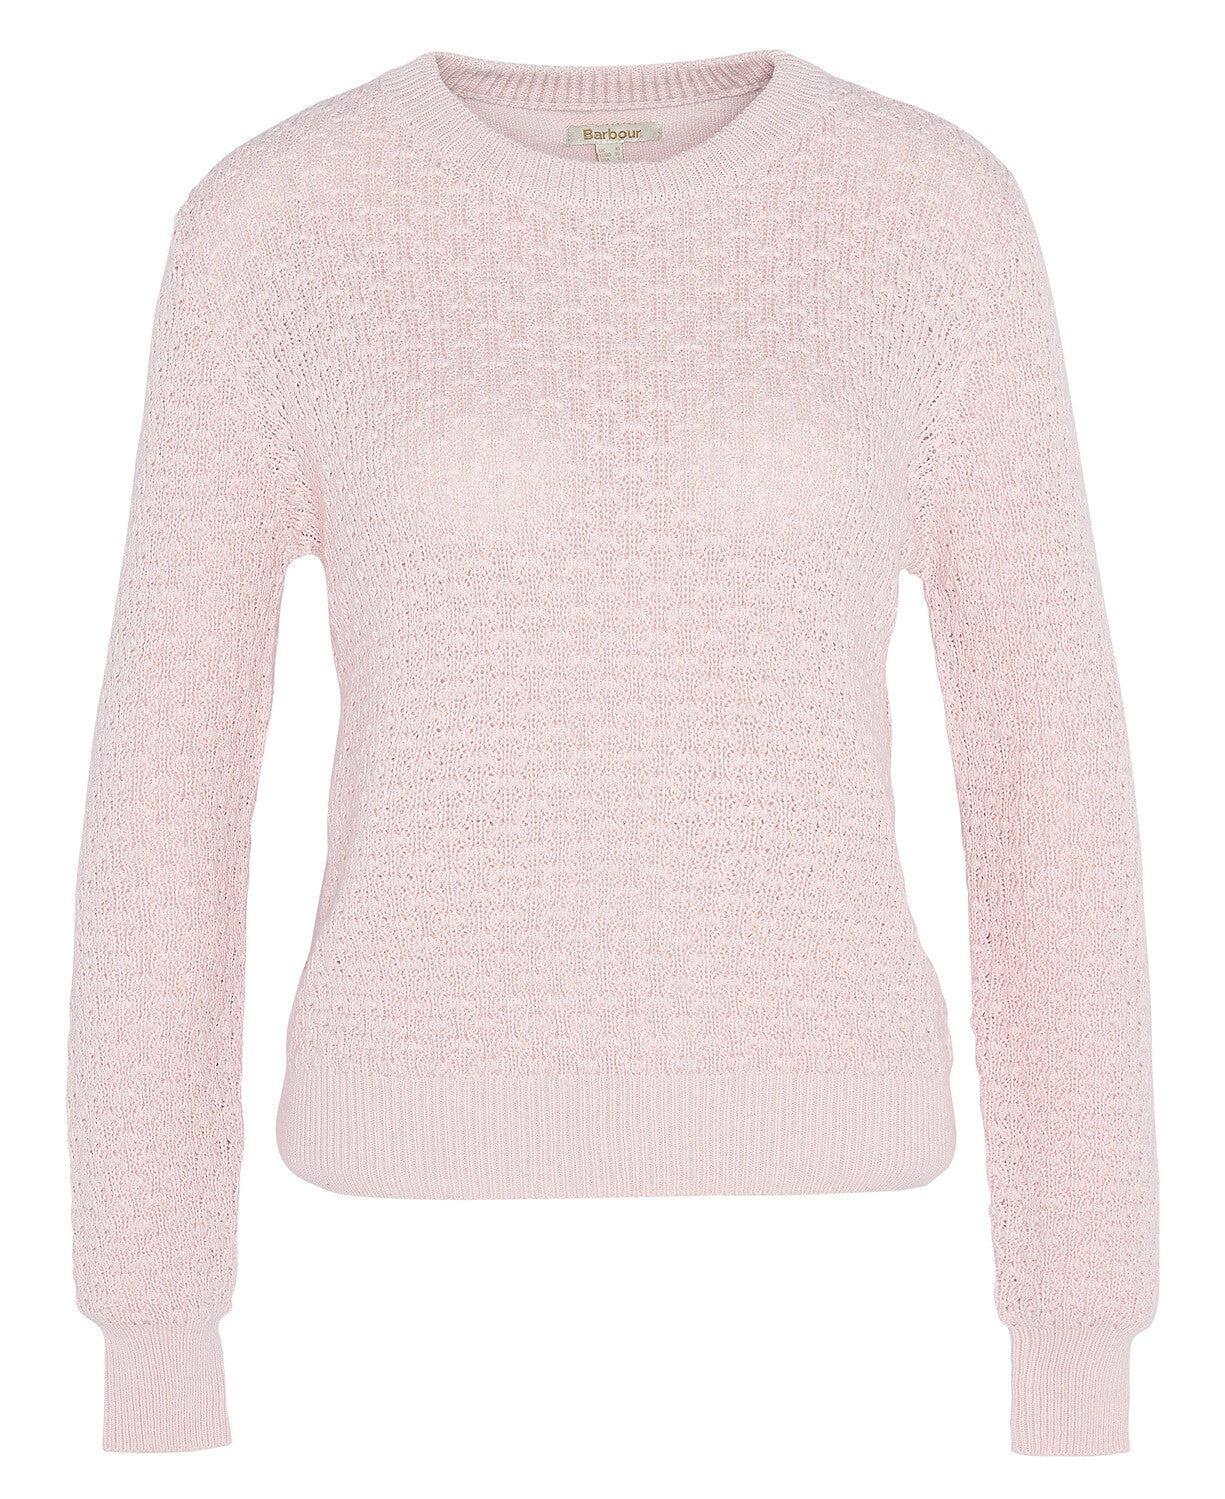 Barbour Angelonia Knitted Jumper